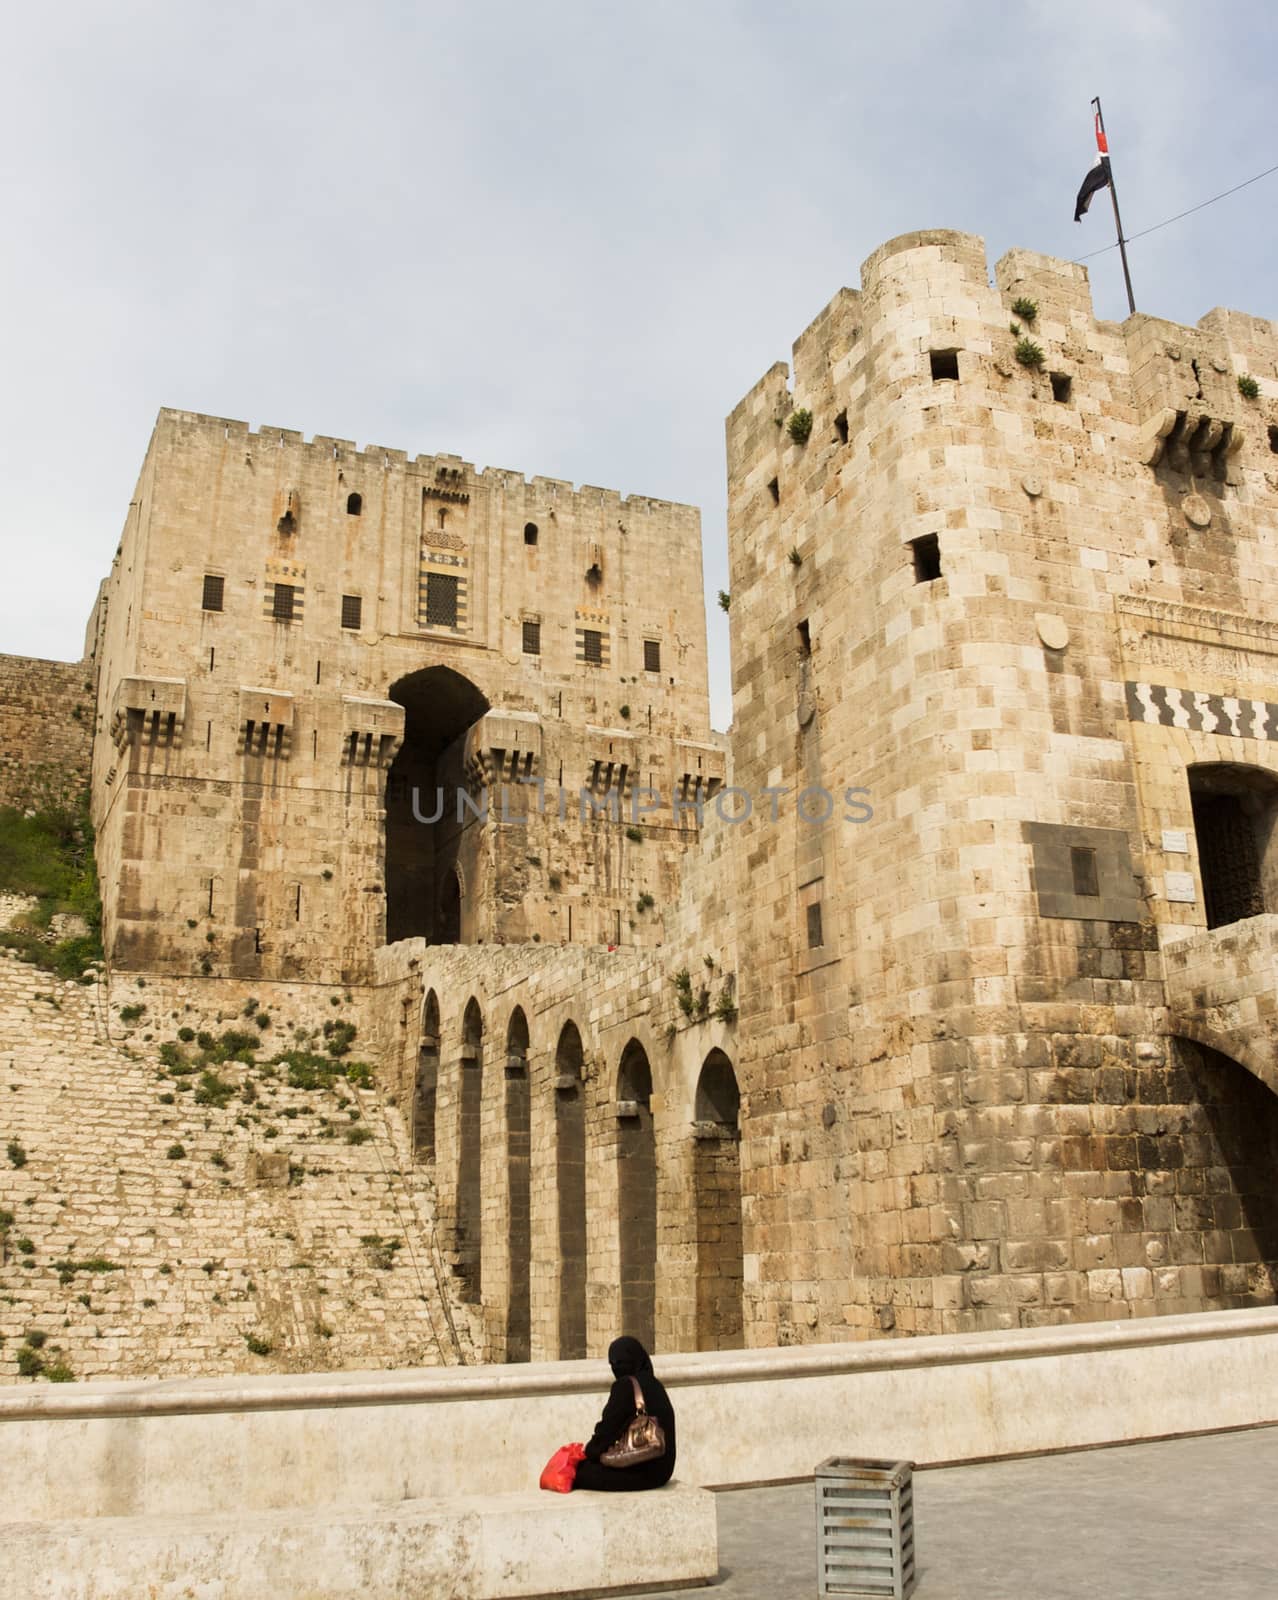 Before the war, The Citadel of Aleppo is a large medieval fortified palace in the centre of the old city of Aleppo, northern Syria